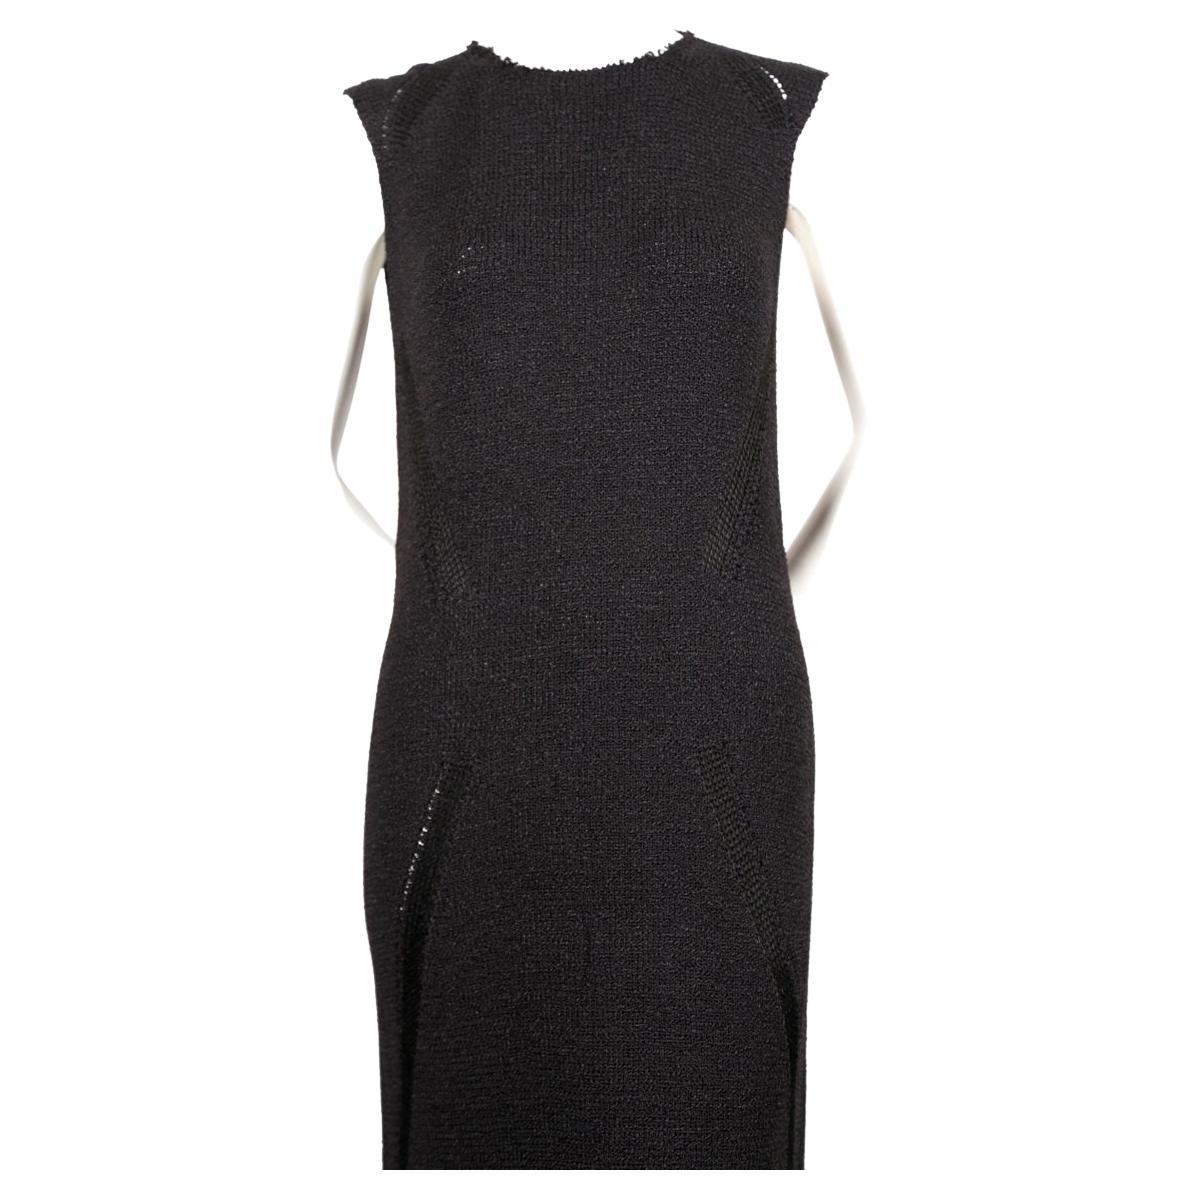 Jet-black, floor length knit dress with raw collar and delicate woven hem designed by Phoebe Philo for Celine. Size S. Approximate measurements: shoulder 13.5